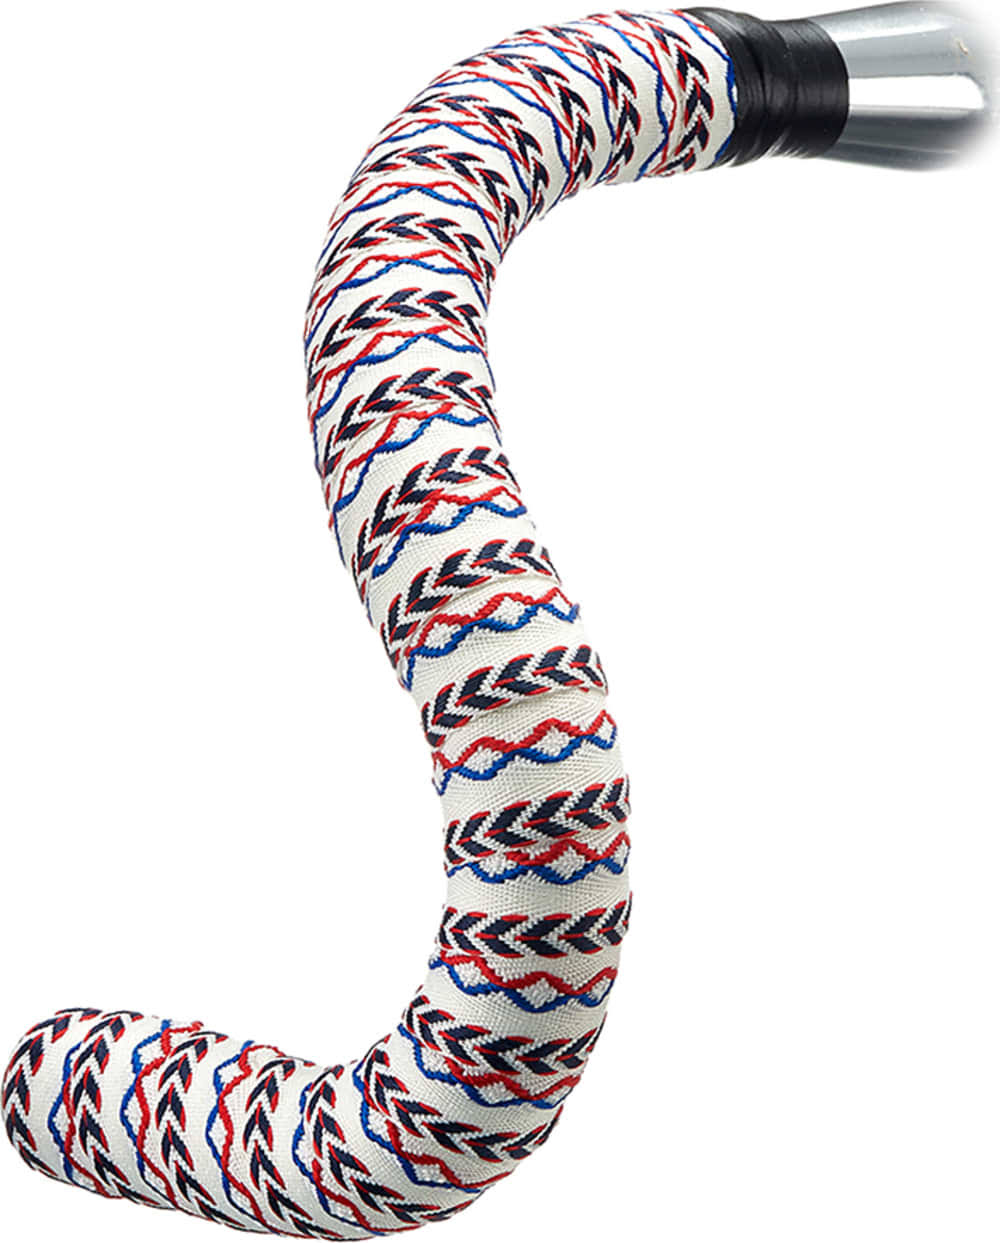 Serfas Woven Bicycle Handle Bar Tape - Arrow Red, White and Blue